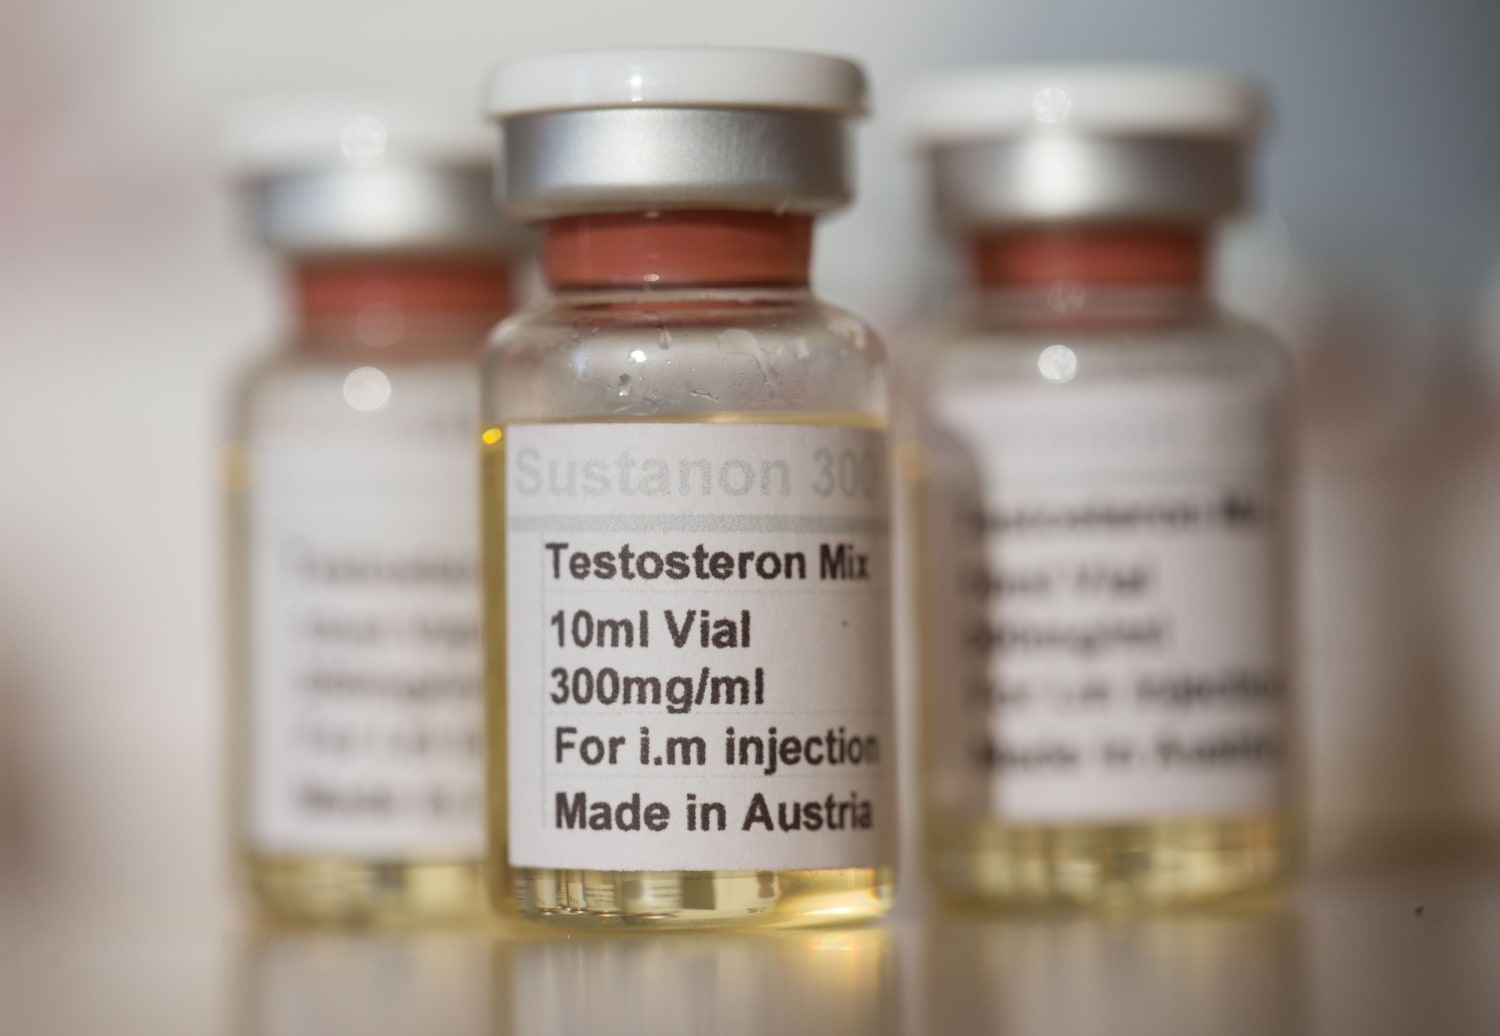 Does anabolic steroids law Sometimes Make You Feel Stupid?